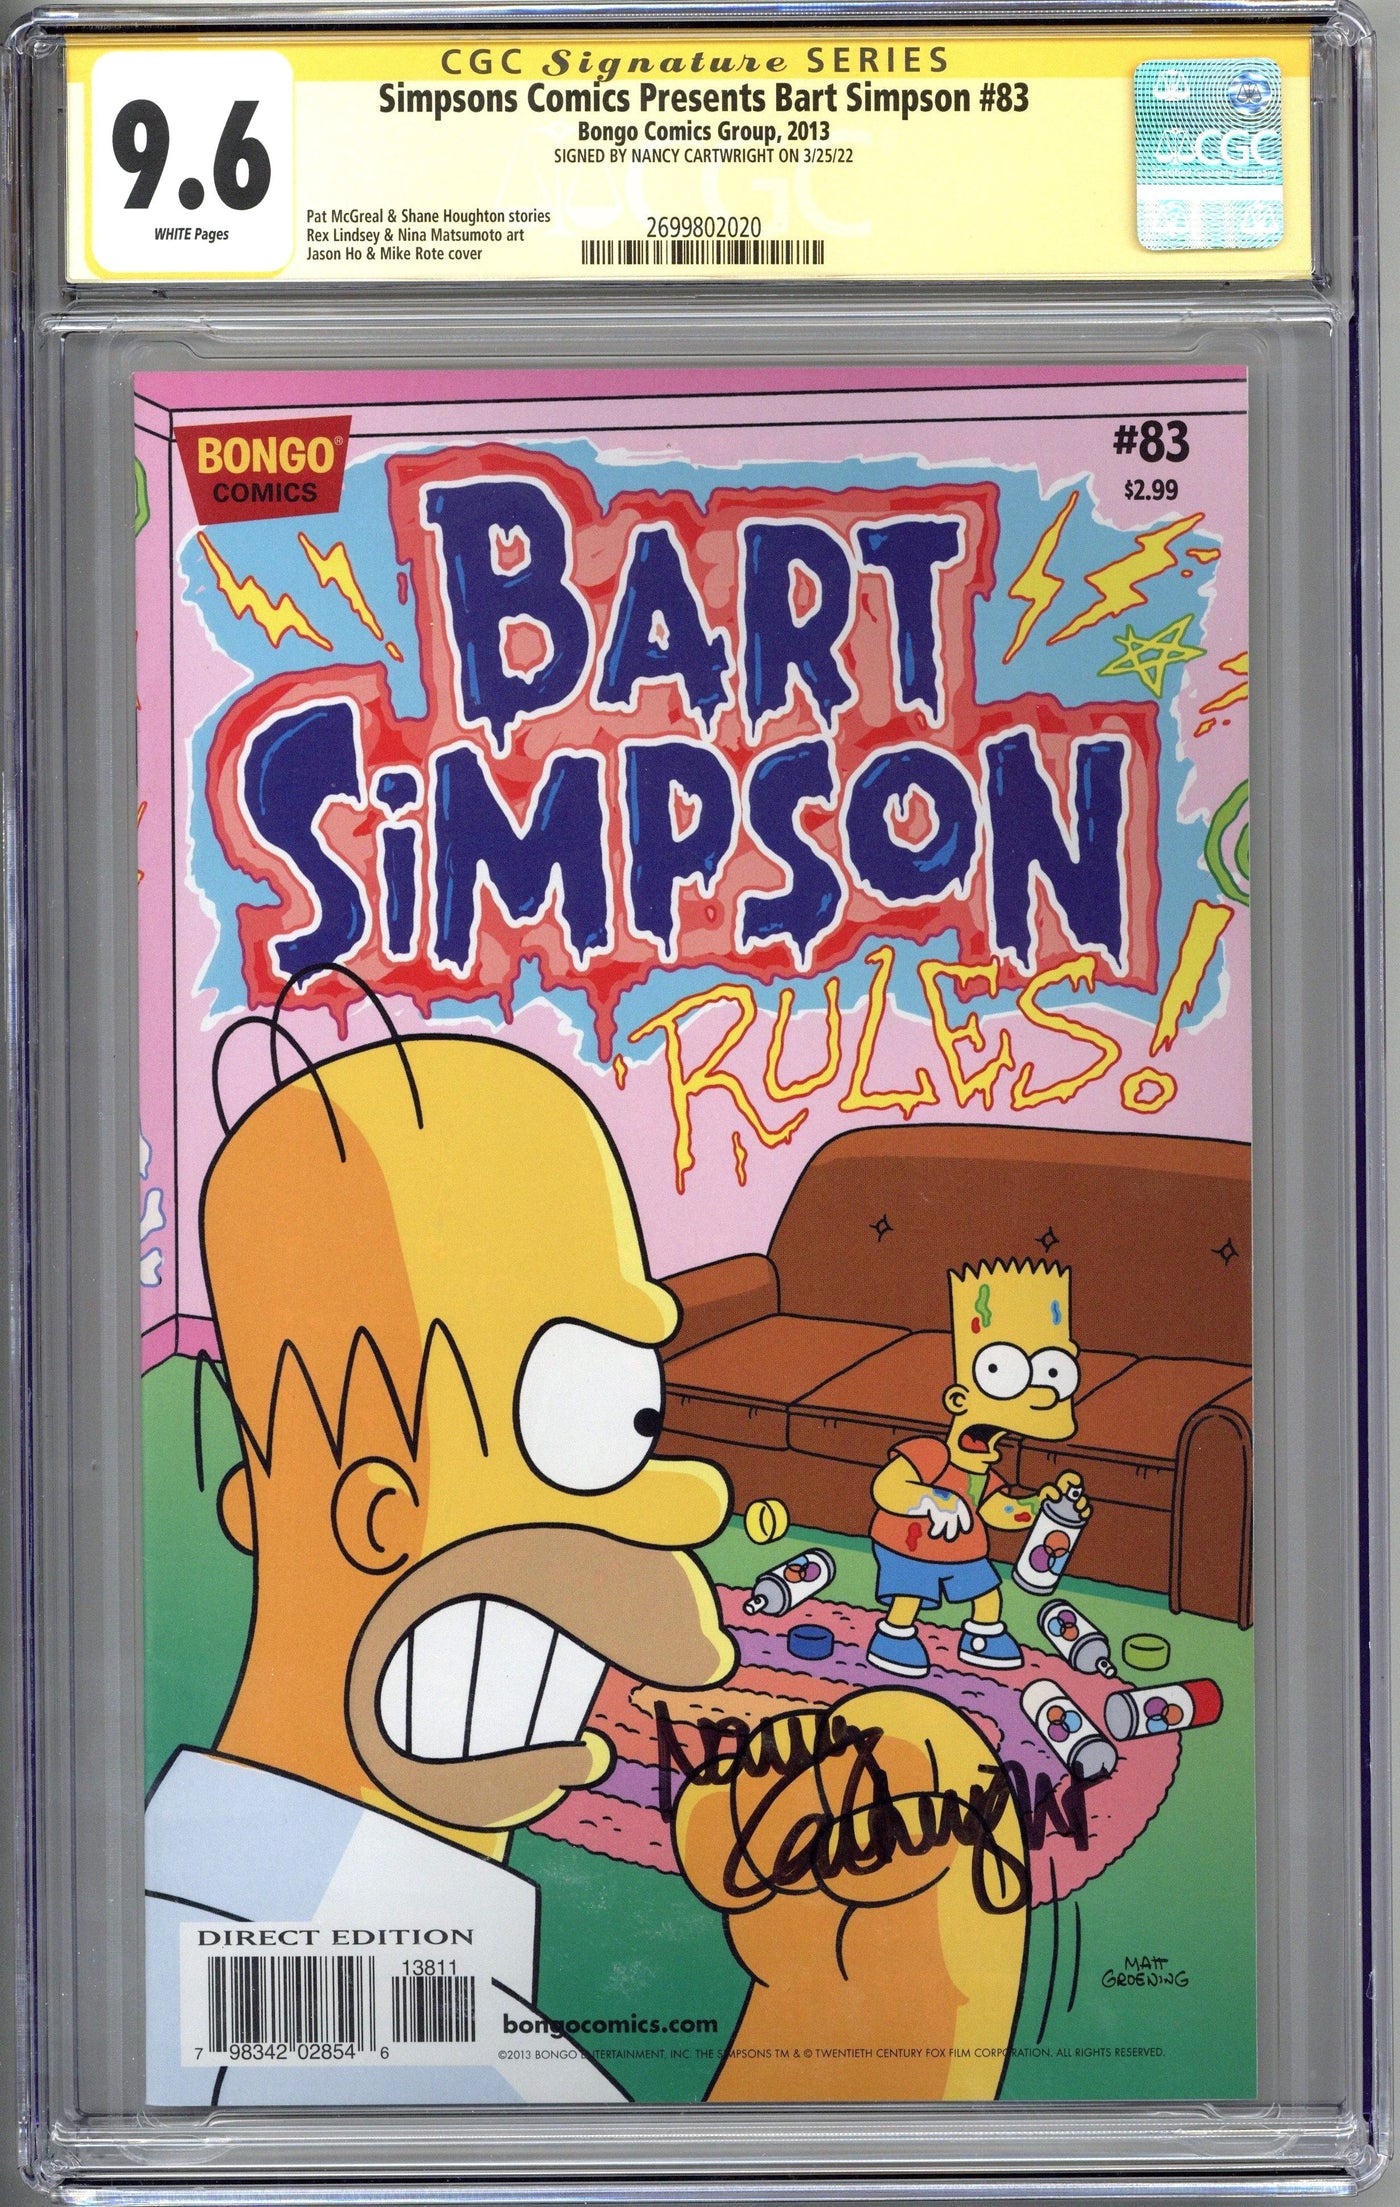 Nancy Cartwright Signed Bart Simpson Comic Book CGC 9.6 Autographed NC2